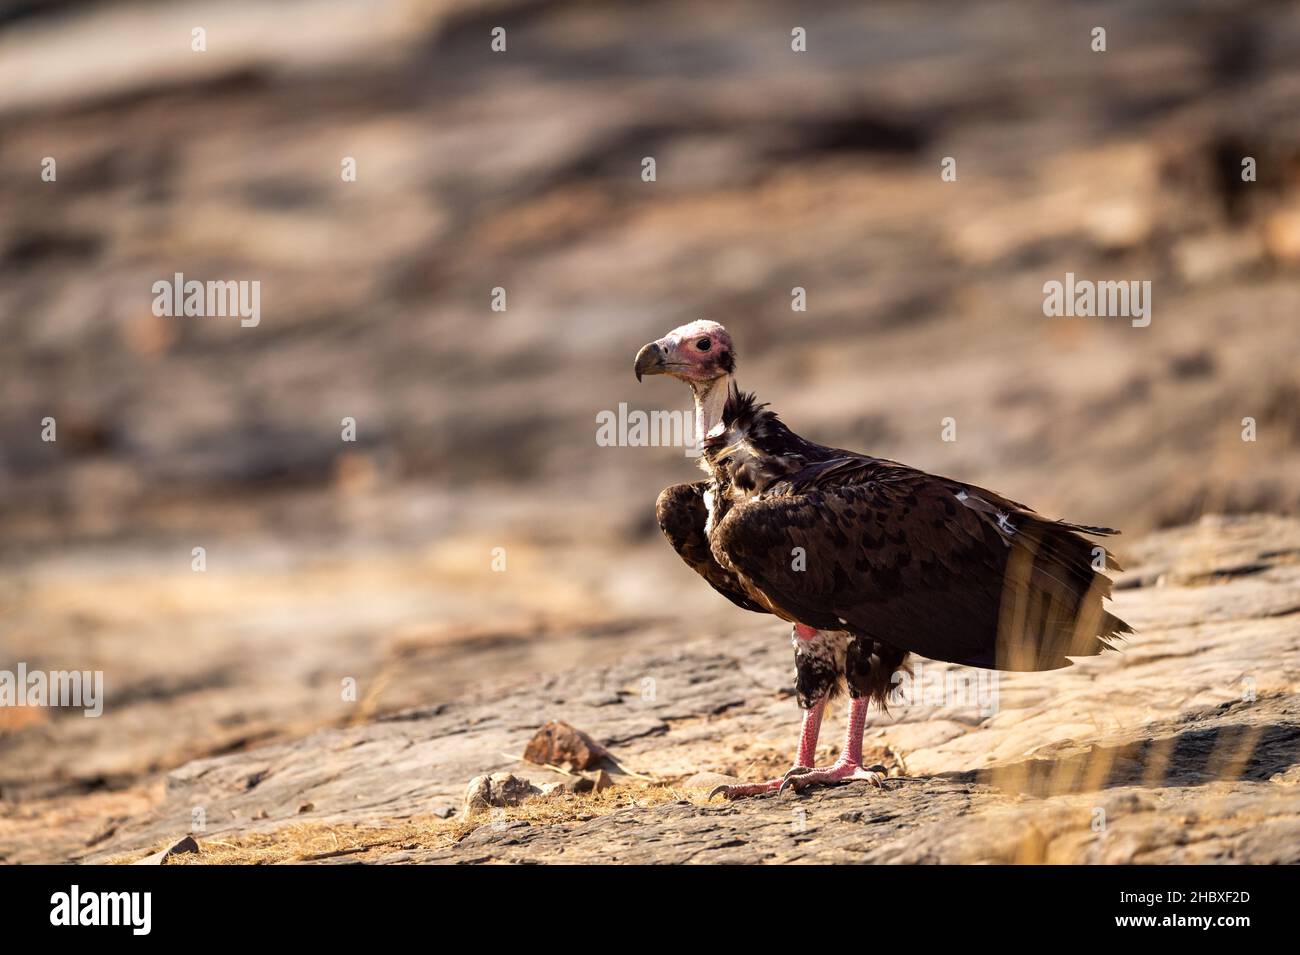 red headed vulture or sarcogyps calvus or Asian king or Indian black vulture closeup or portrait at Ranthambore National Park or forest Reserve india Stock Photo